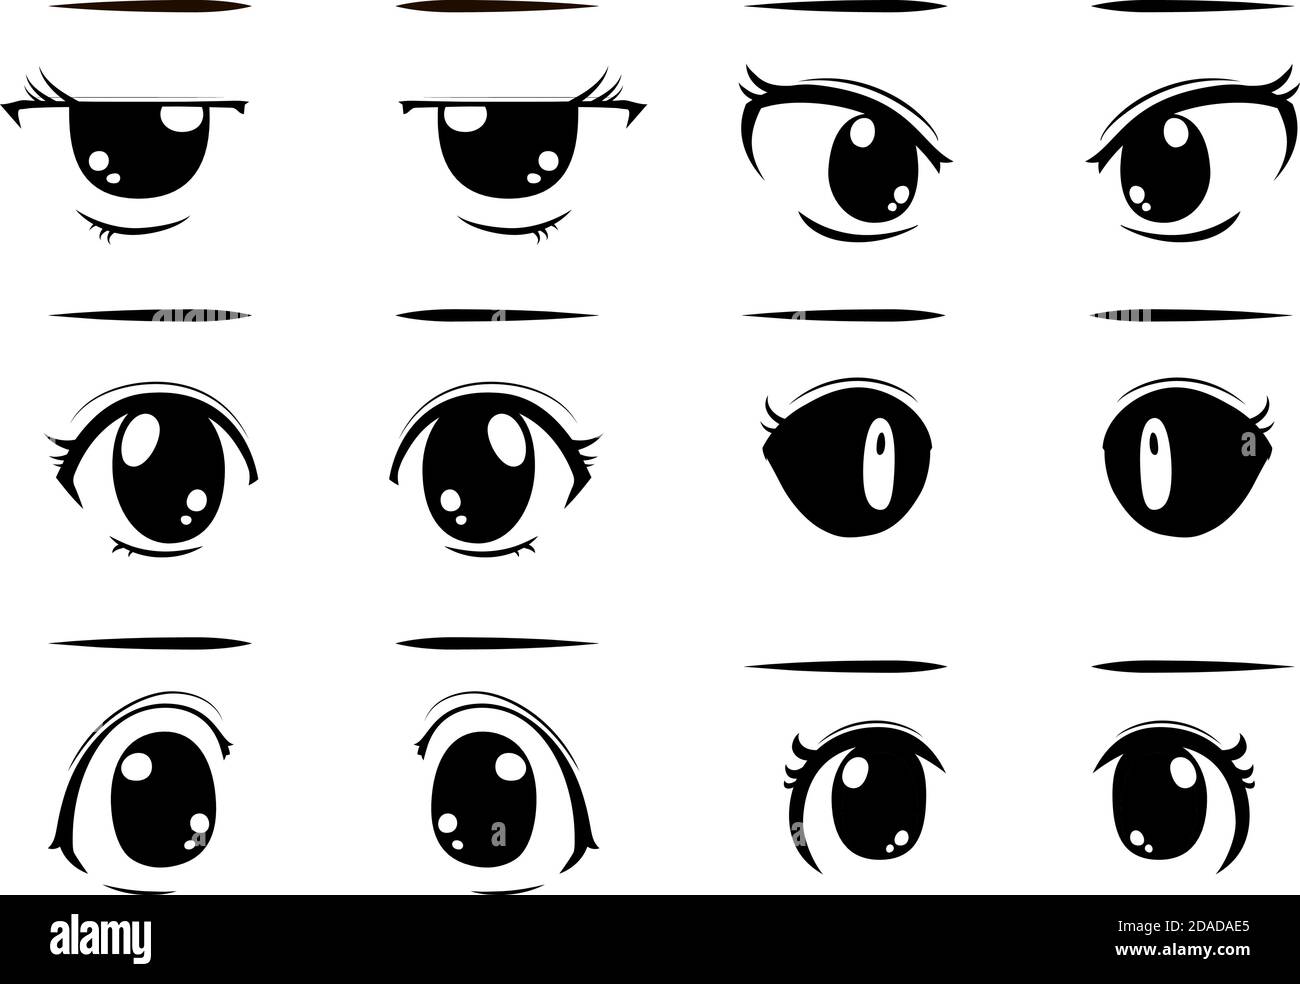 Manga Eyes Vector Art Icons and Graphics for Free Download